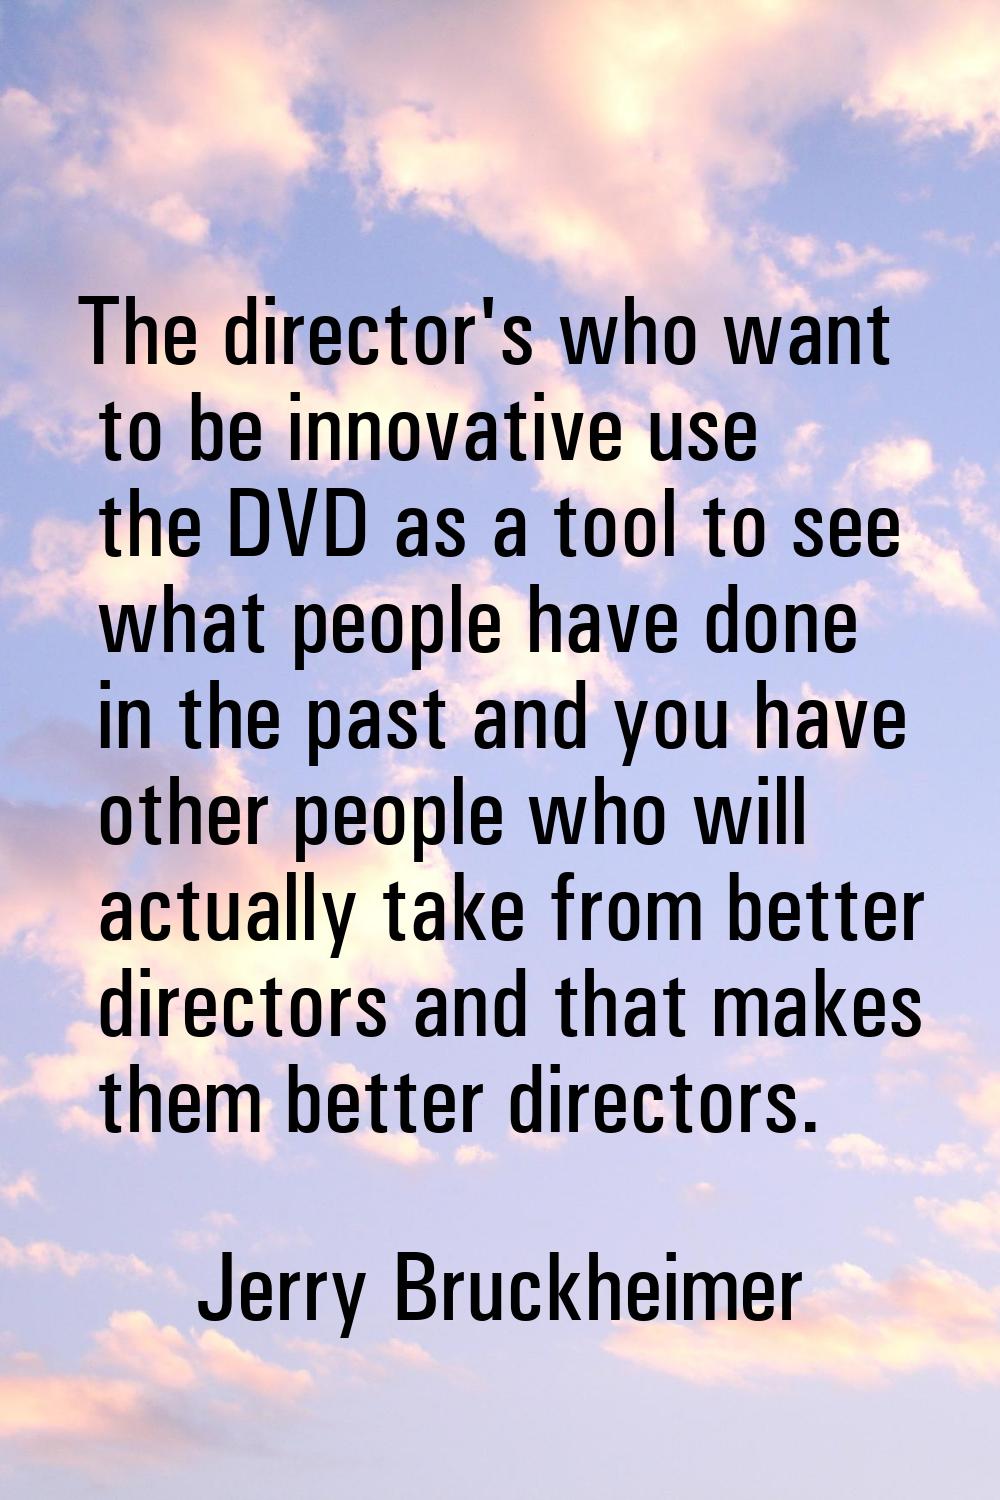 The director's who want to be innovative use the DVD as a tool to see what people have done in the 